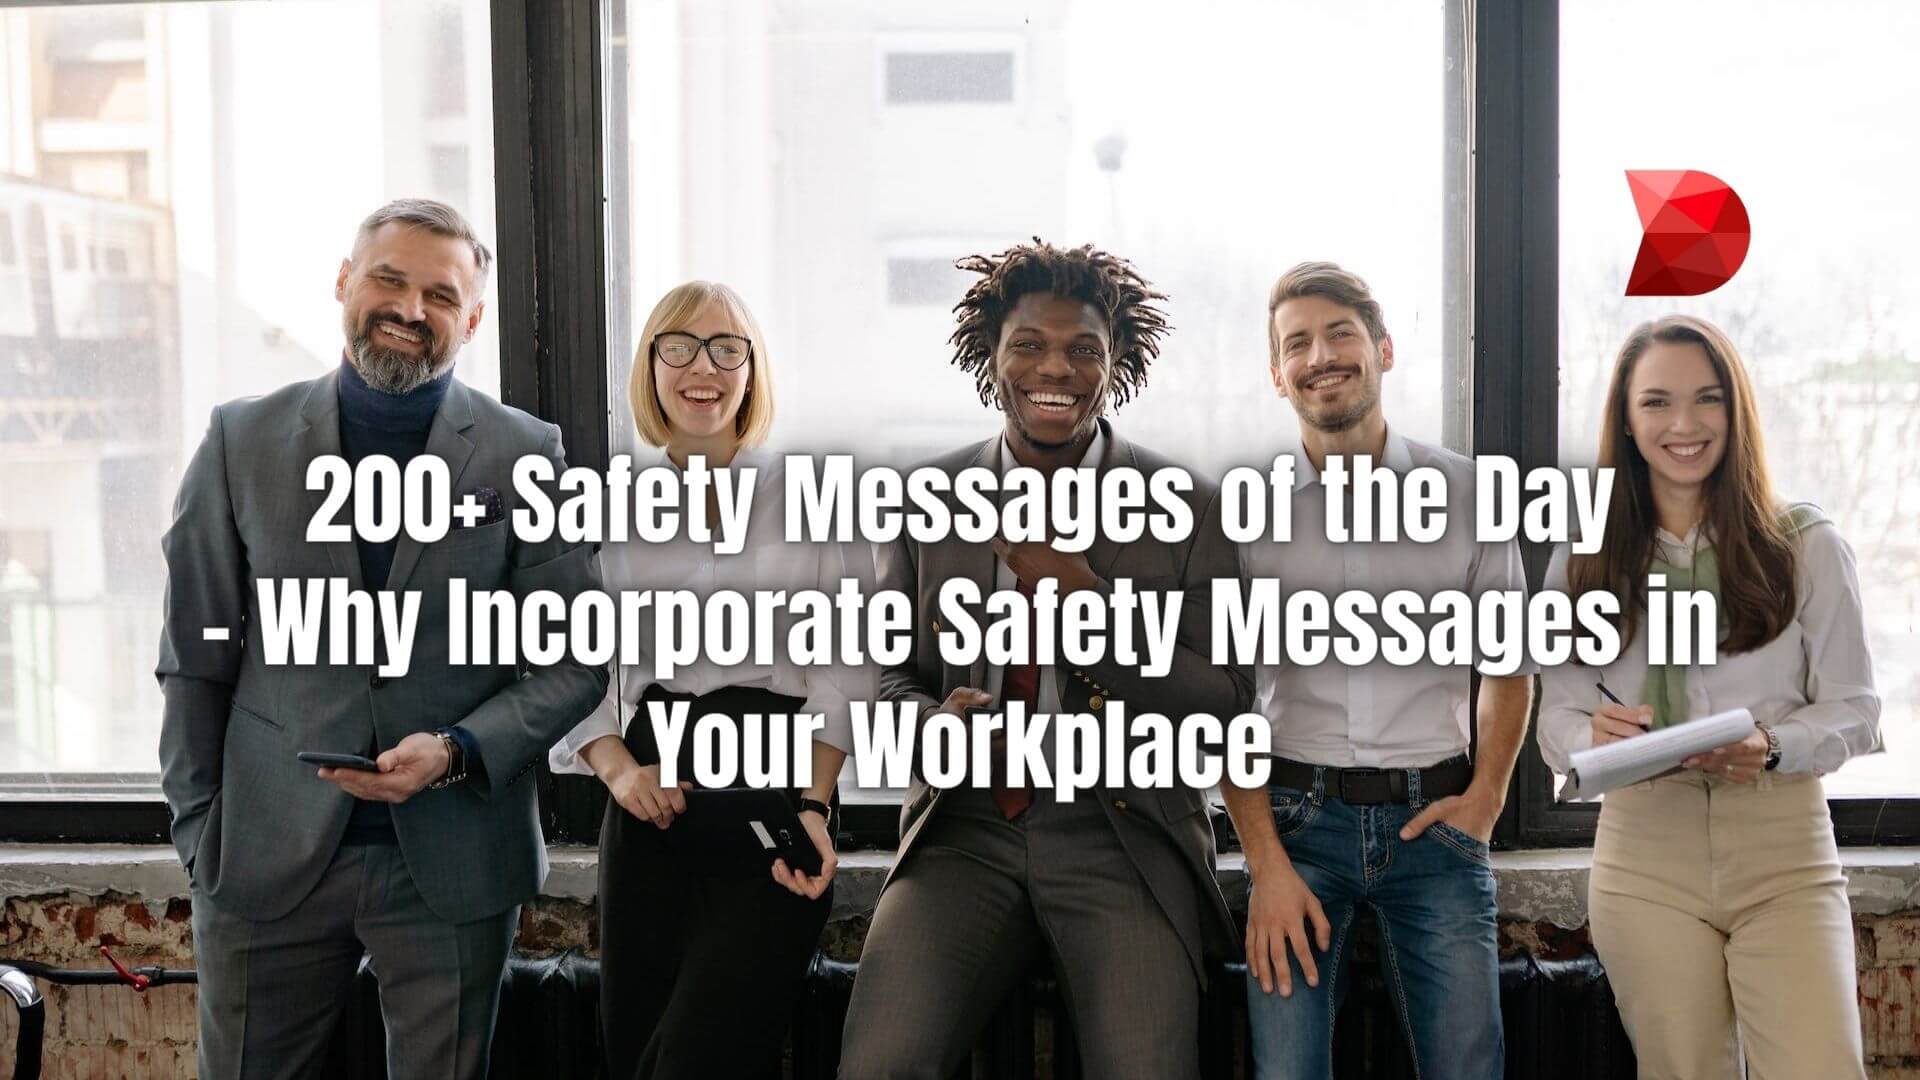 Unlock the potential of safety messaging! Click here to explore 200+ daily safety messages to promote a safety culture in your organization.